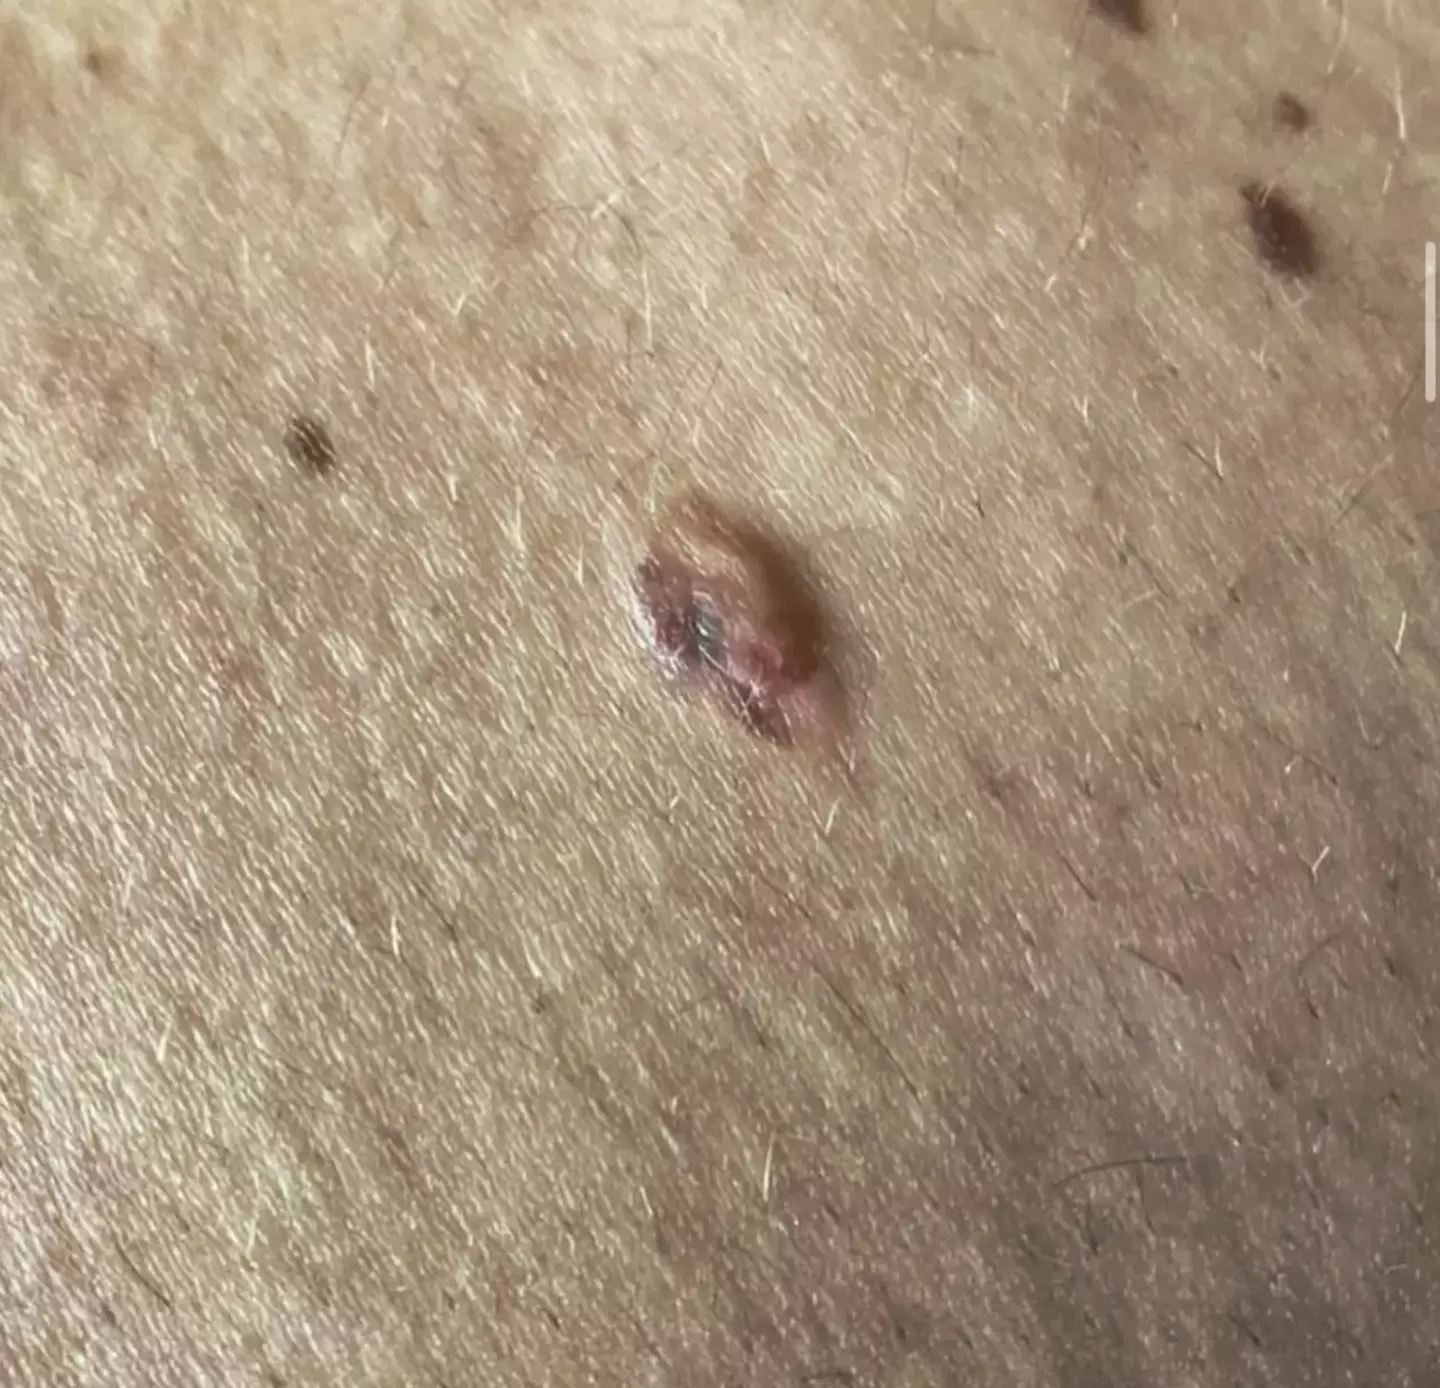 Jak noticed a mole that started to bleed.